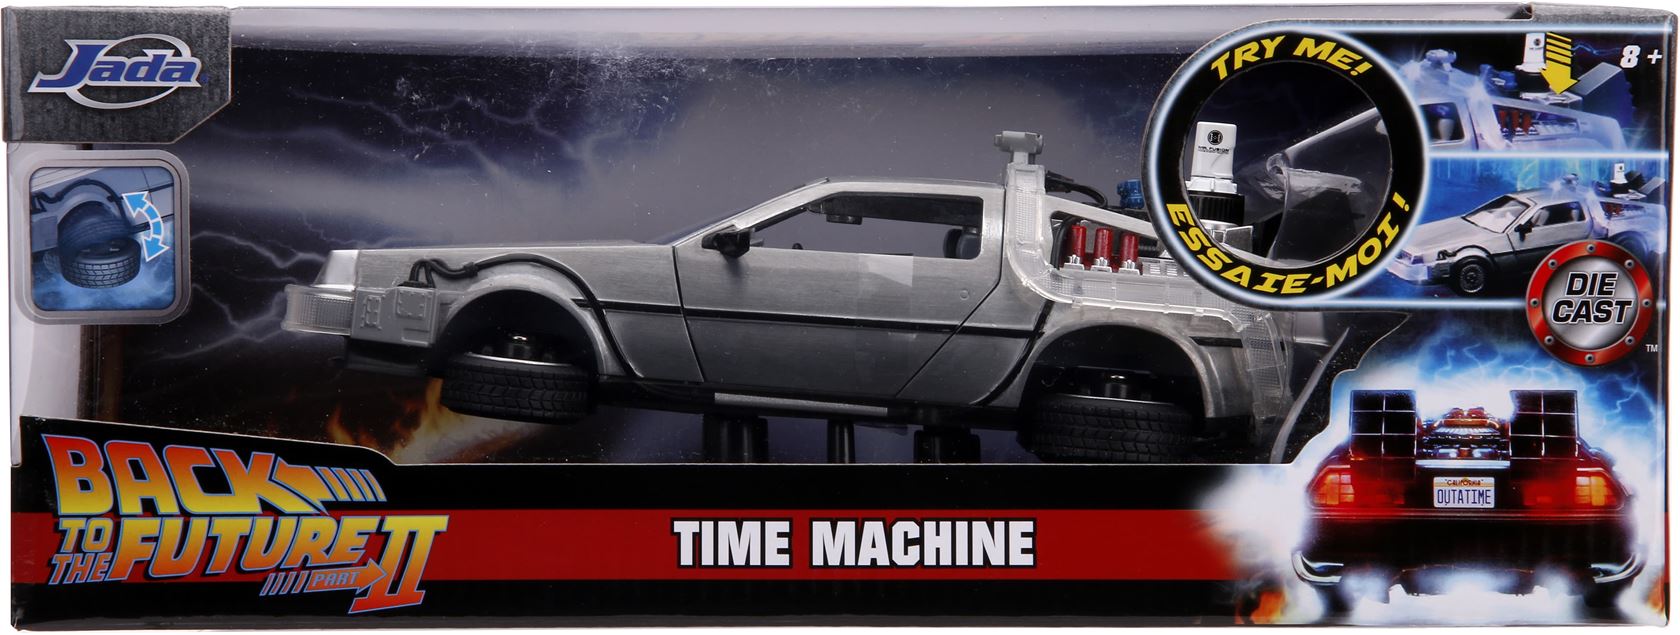 Time-Machine-Back-to-the-Future-2-1-24